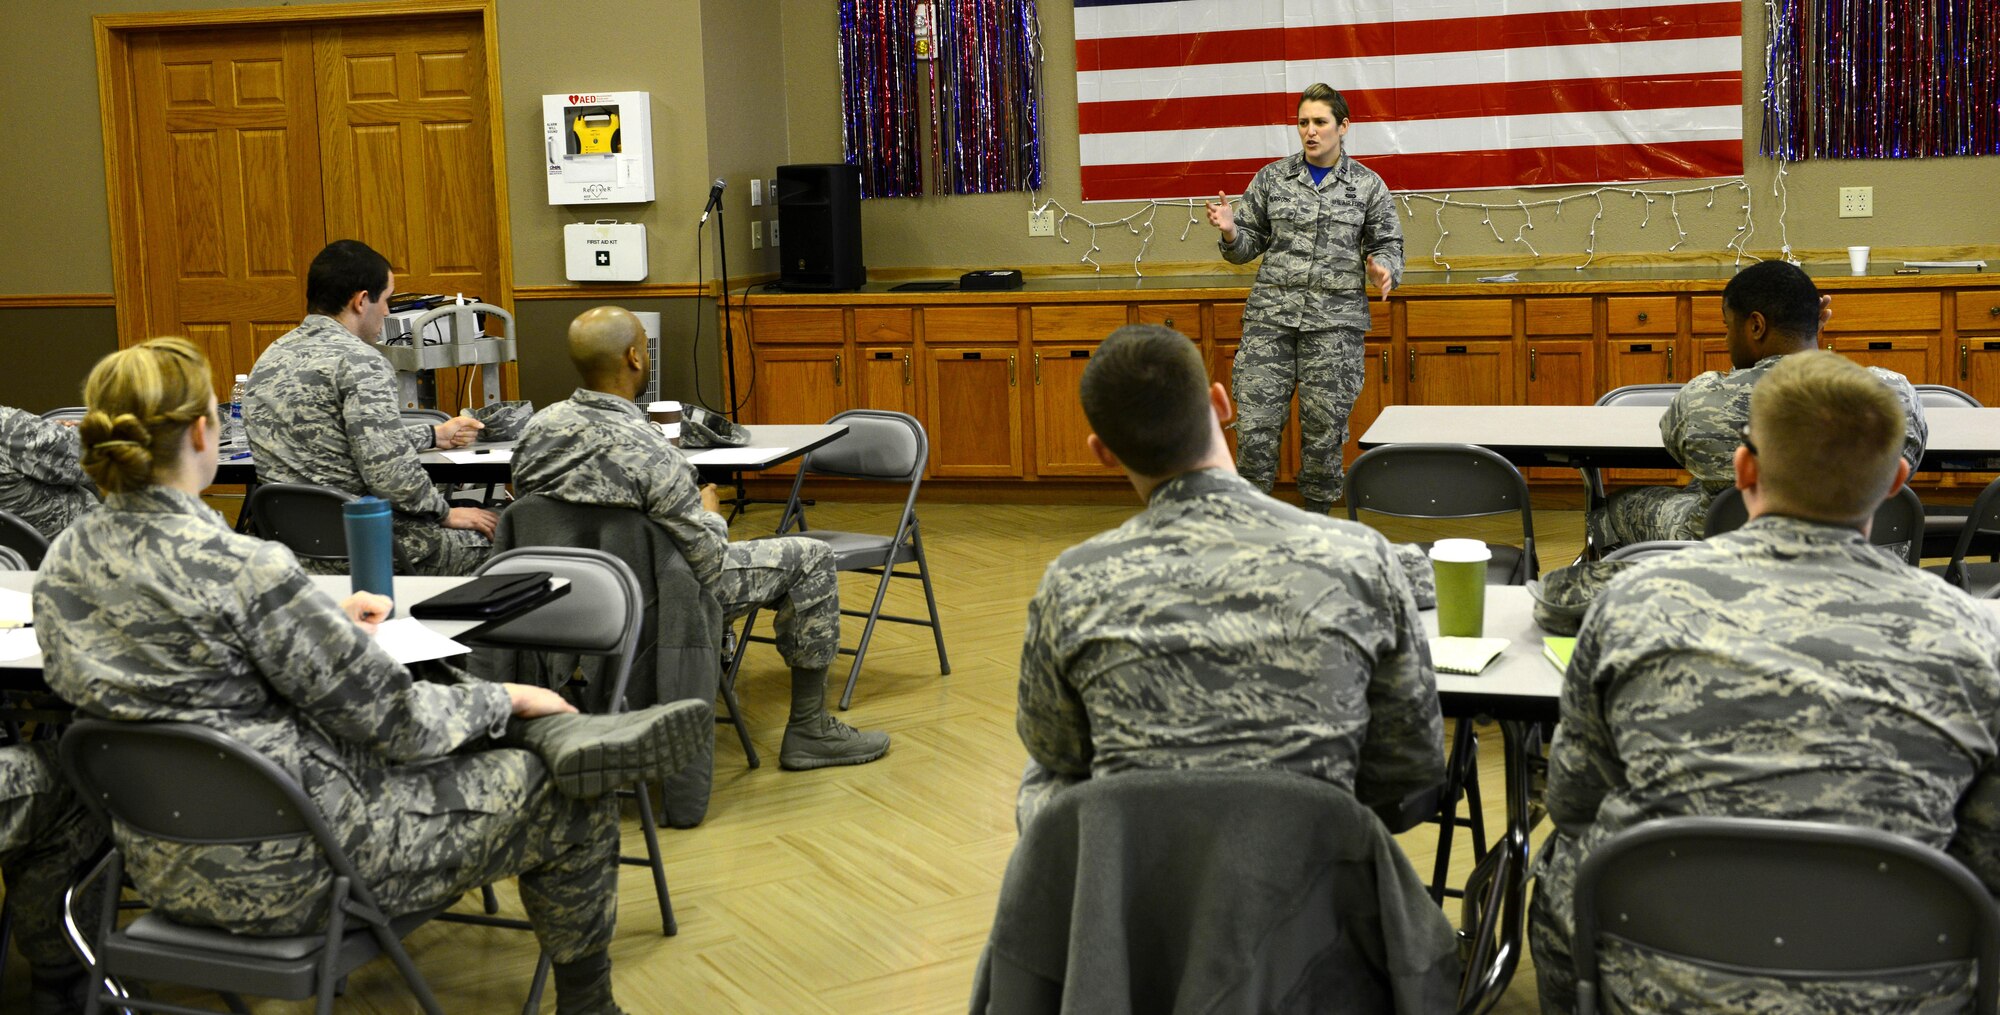 Capt. Carmella Burruss, 22nd Operations Support Squadron deputy chief of wing intelligence and course facilitator, speaks to company grade officers during the First Term Officer’s Course, March 10, 2017, at McConnell Air Force Base, Kan. The first-of-its-kind course provided new officers the opportunity to learn about the base and how to become better leaders. (U.S. Air Force photo/Staff Sgt. Trevor Rhynes)